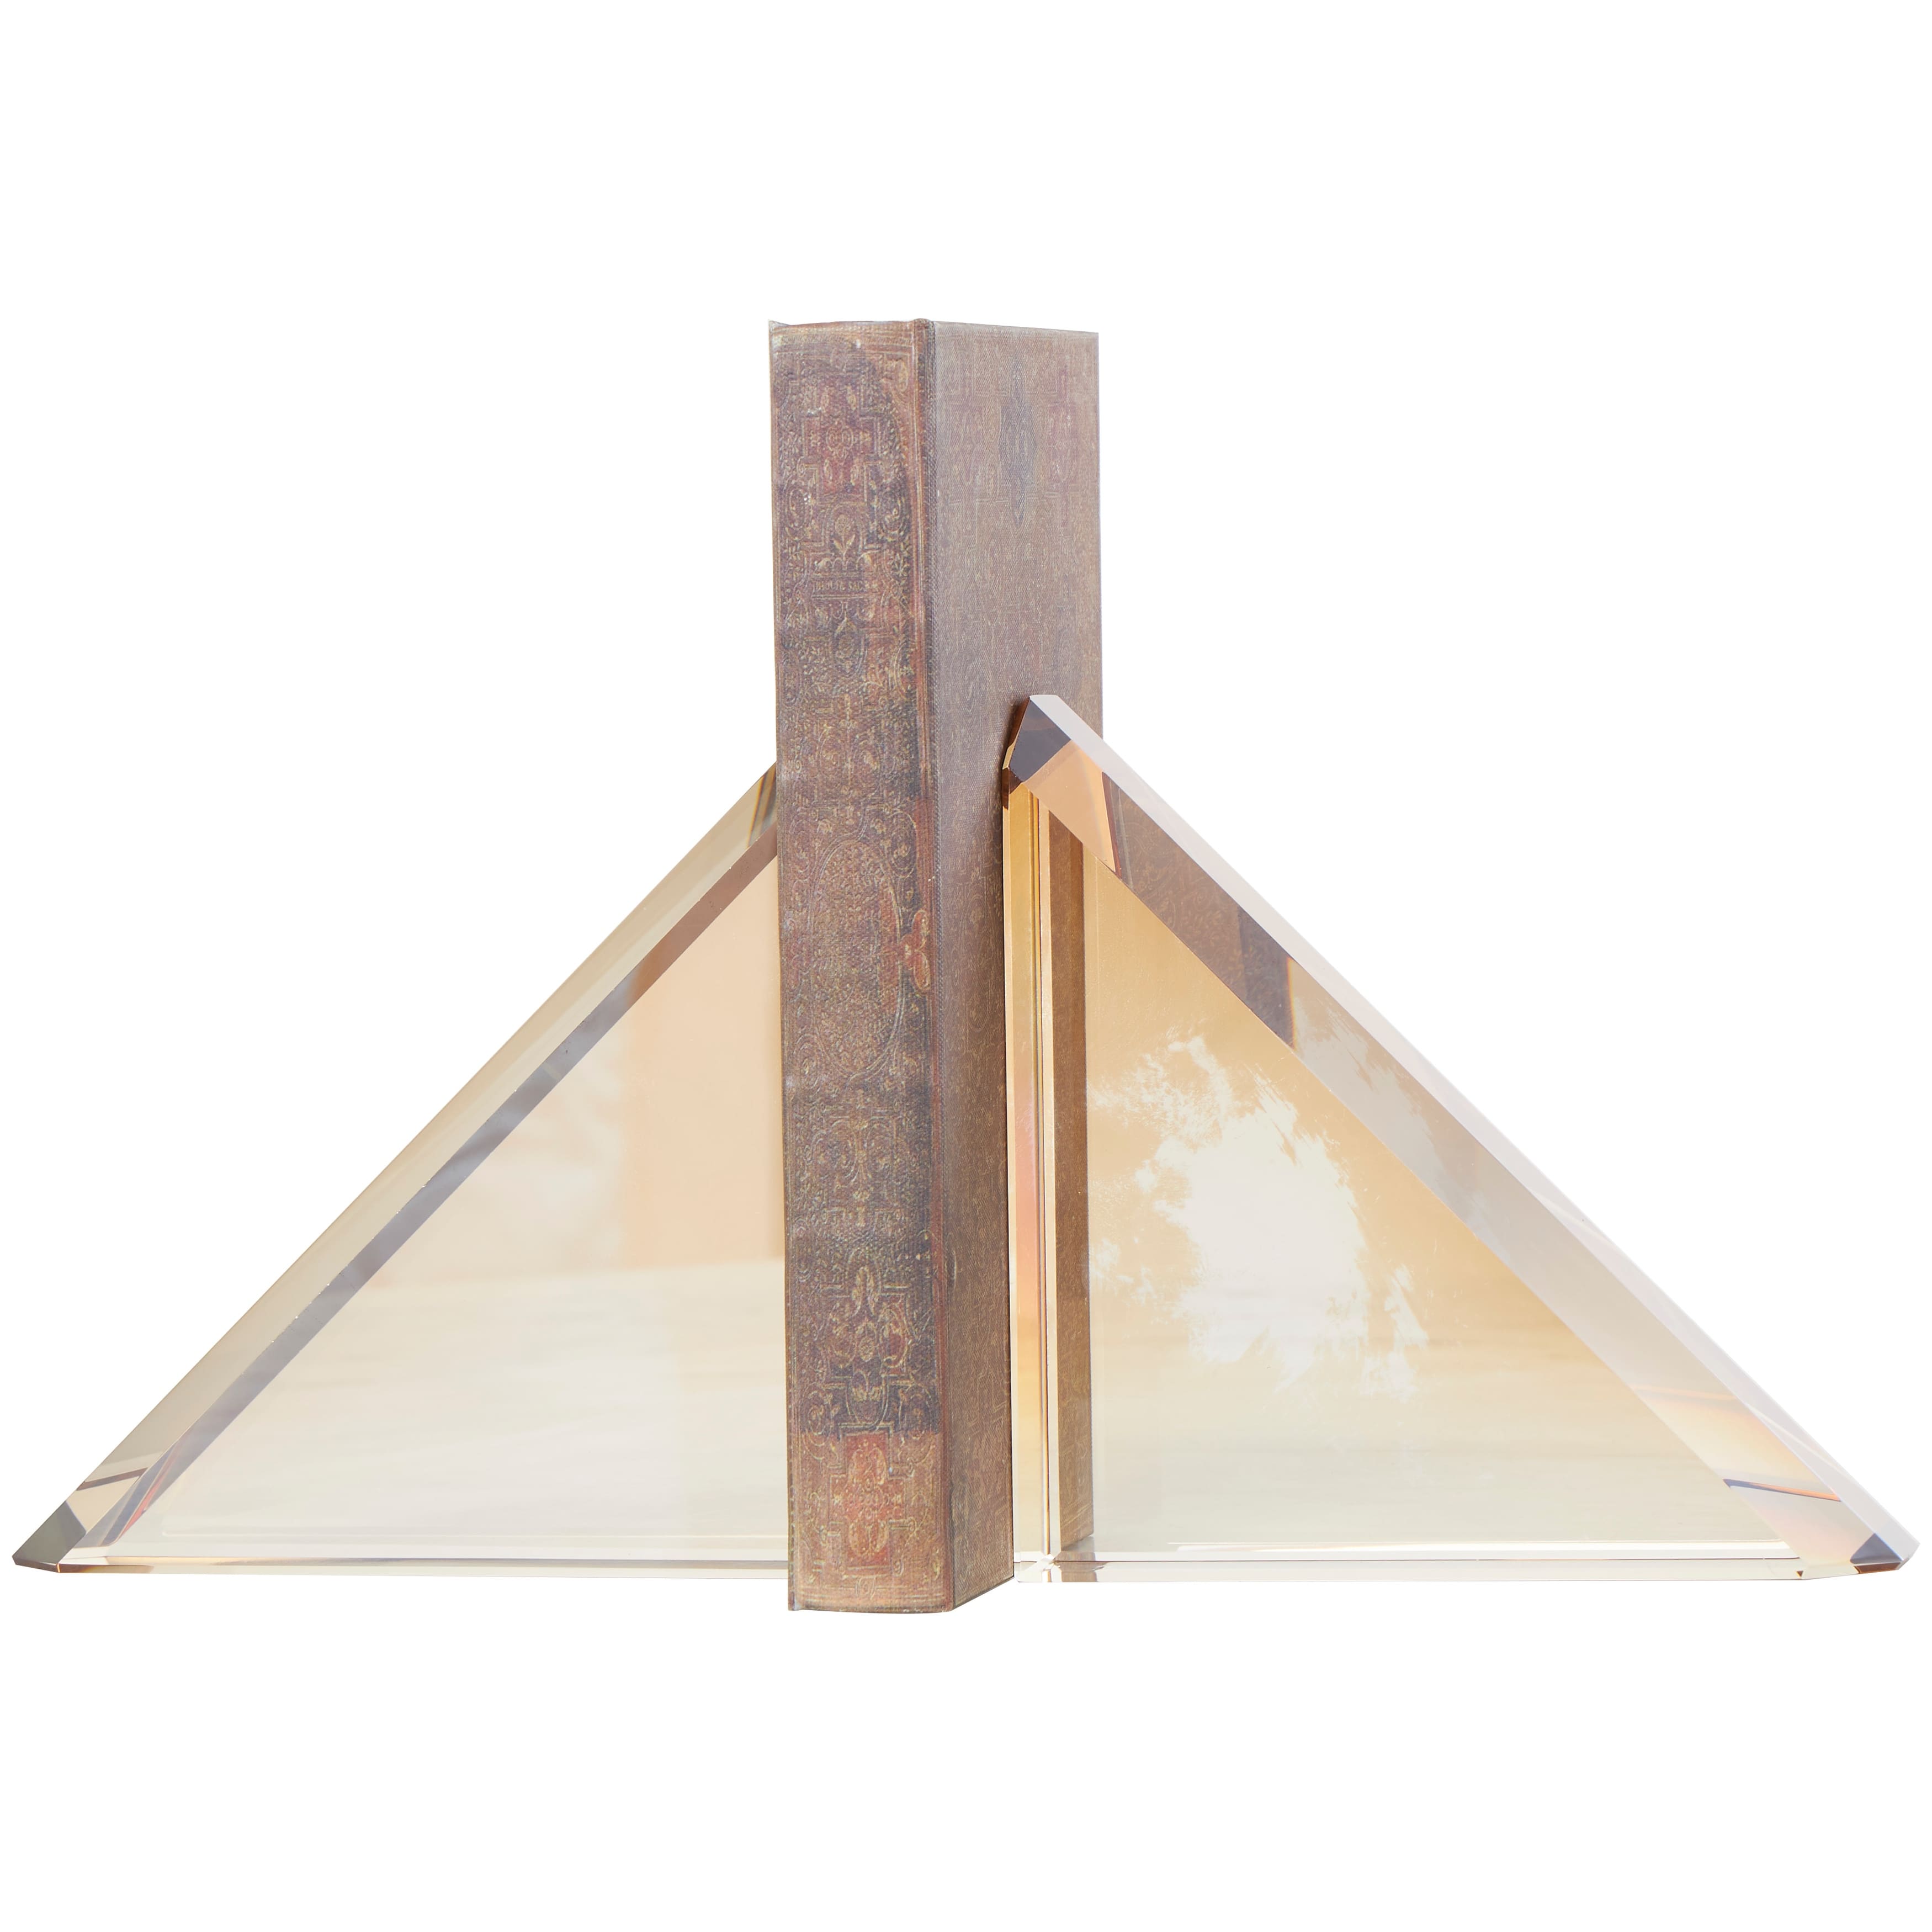 Gold Crystal Pyramid Shaped Geometric Bookends (Set of 2) - Bed Bath ...